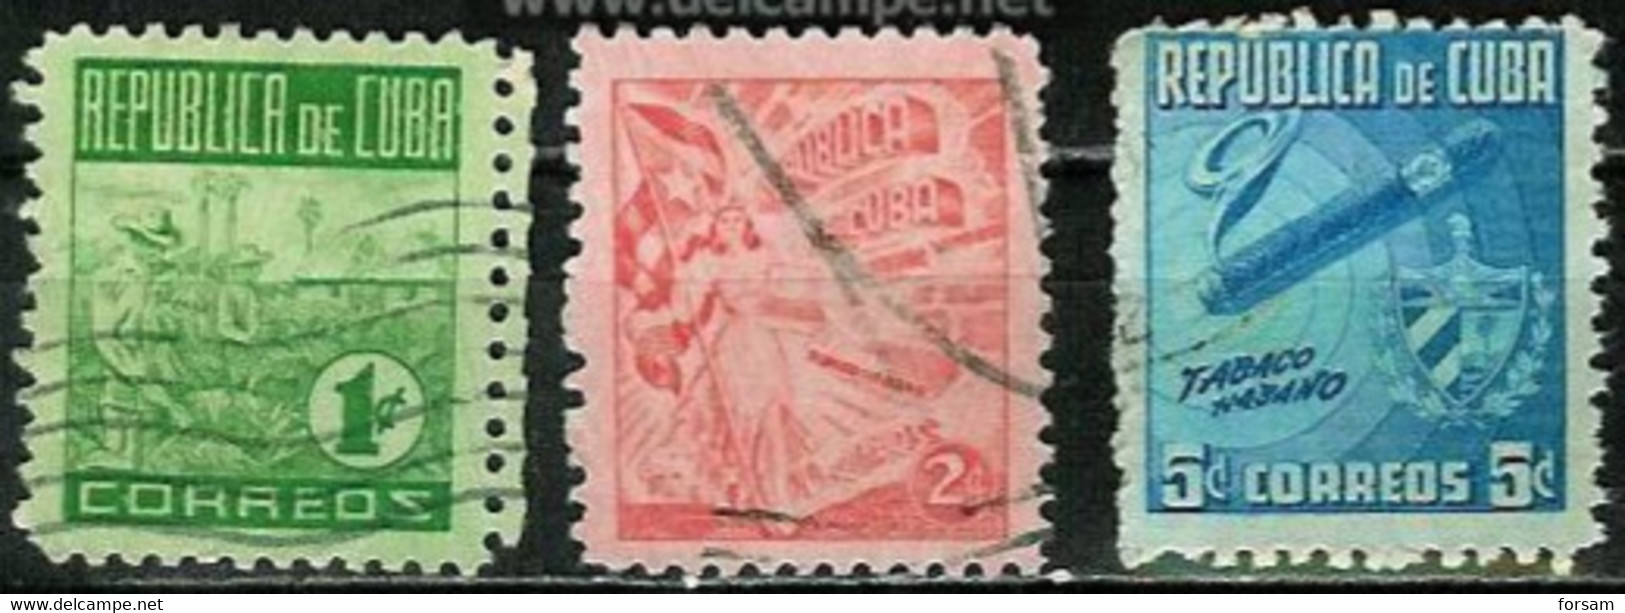 CUBA..1948..Michel # 226-228...used. - Used Stamps